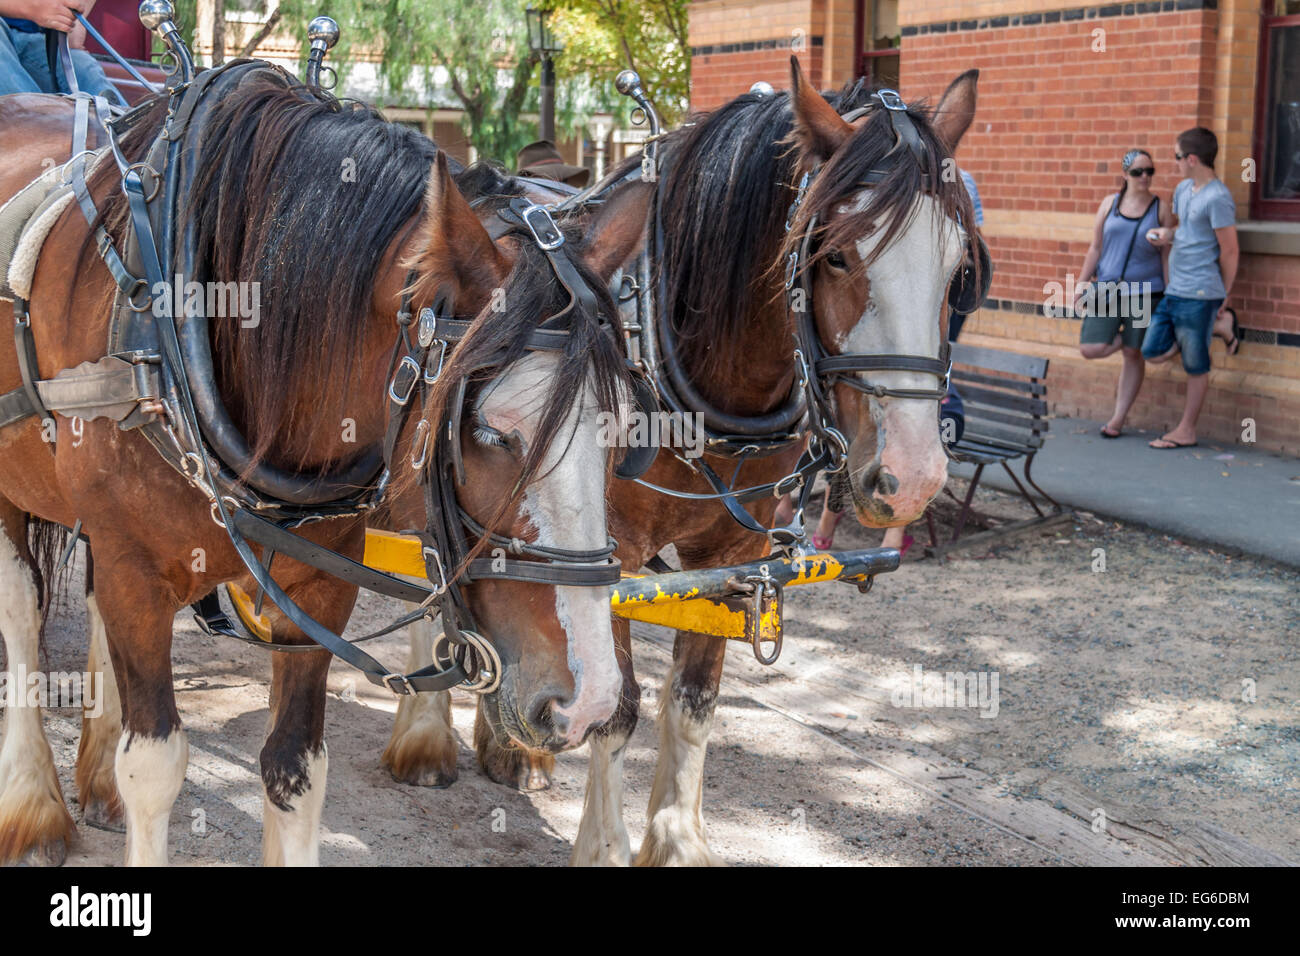 Two horses harnessed pulling wagon Stock Photo